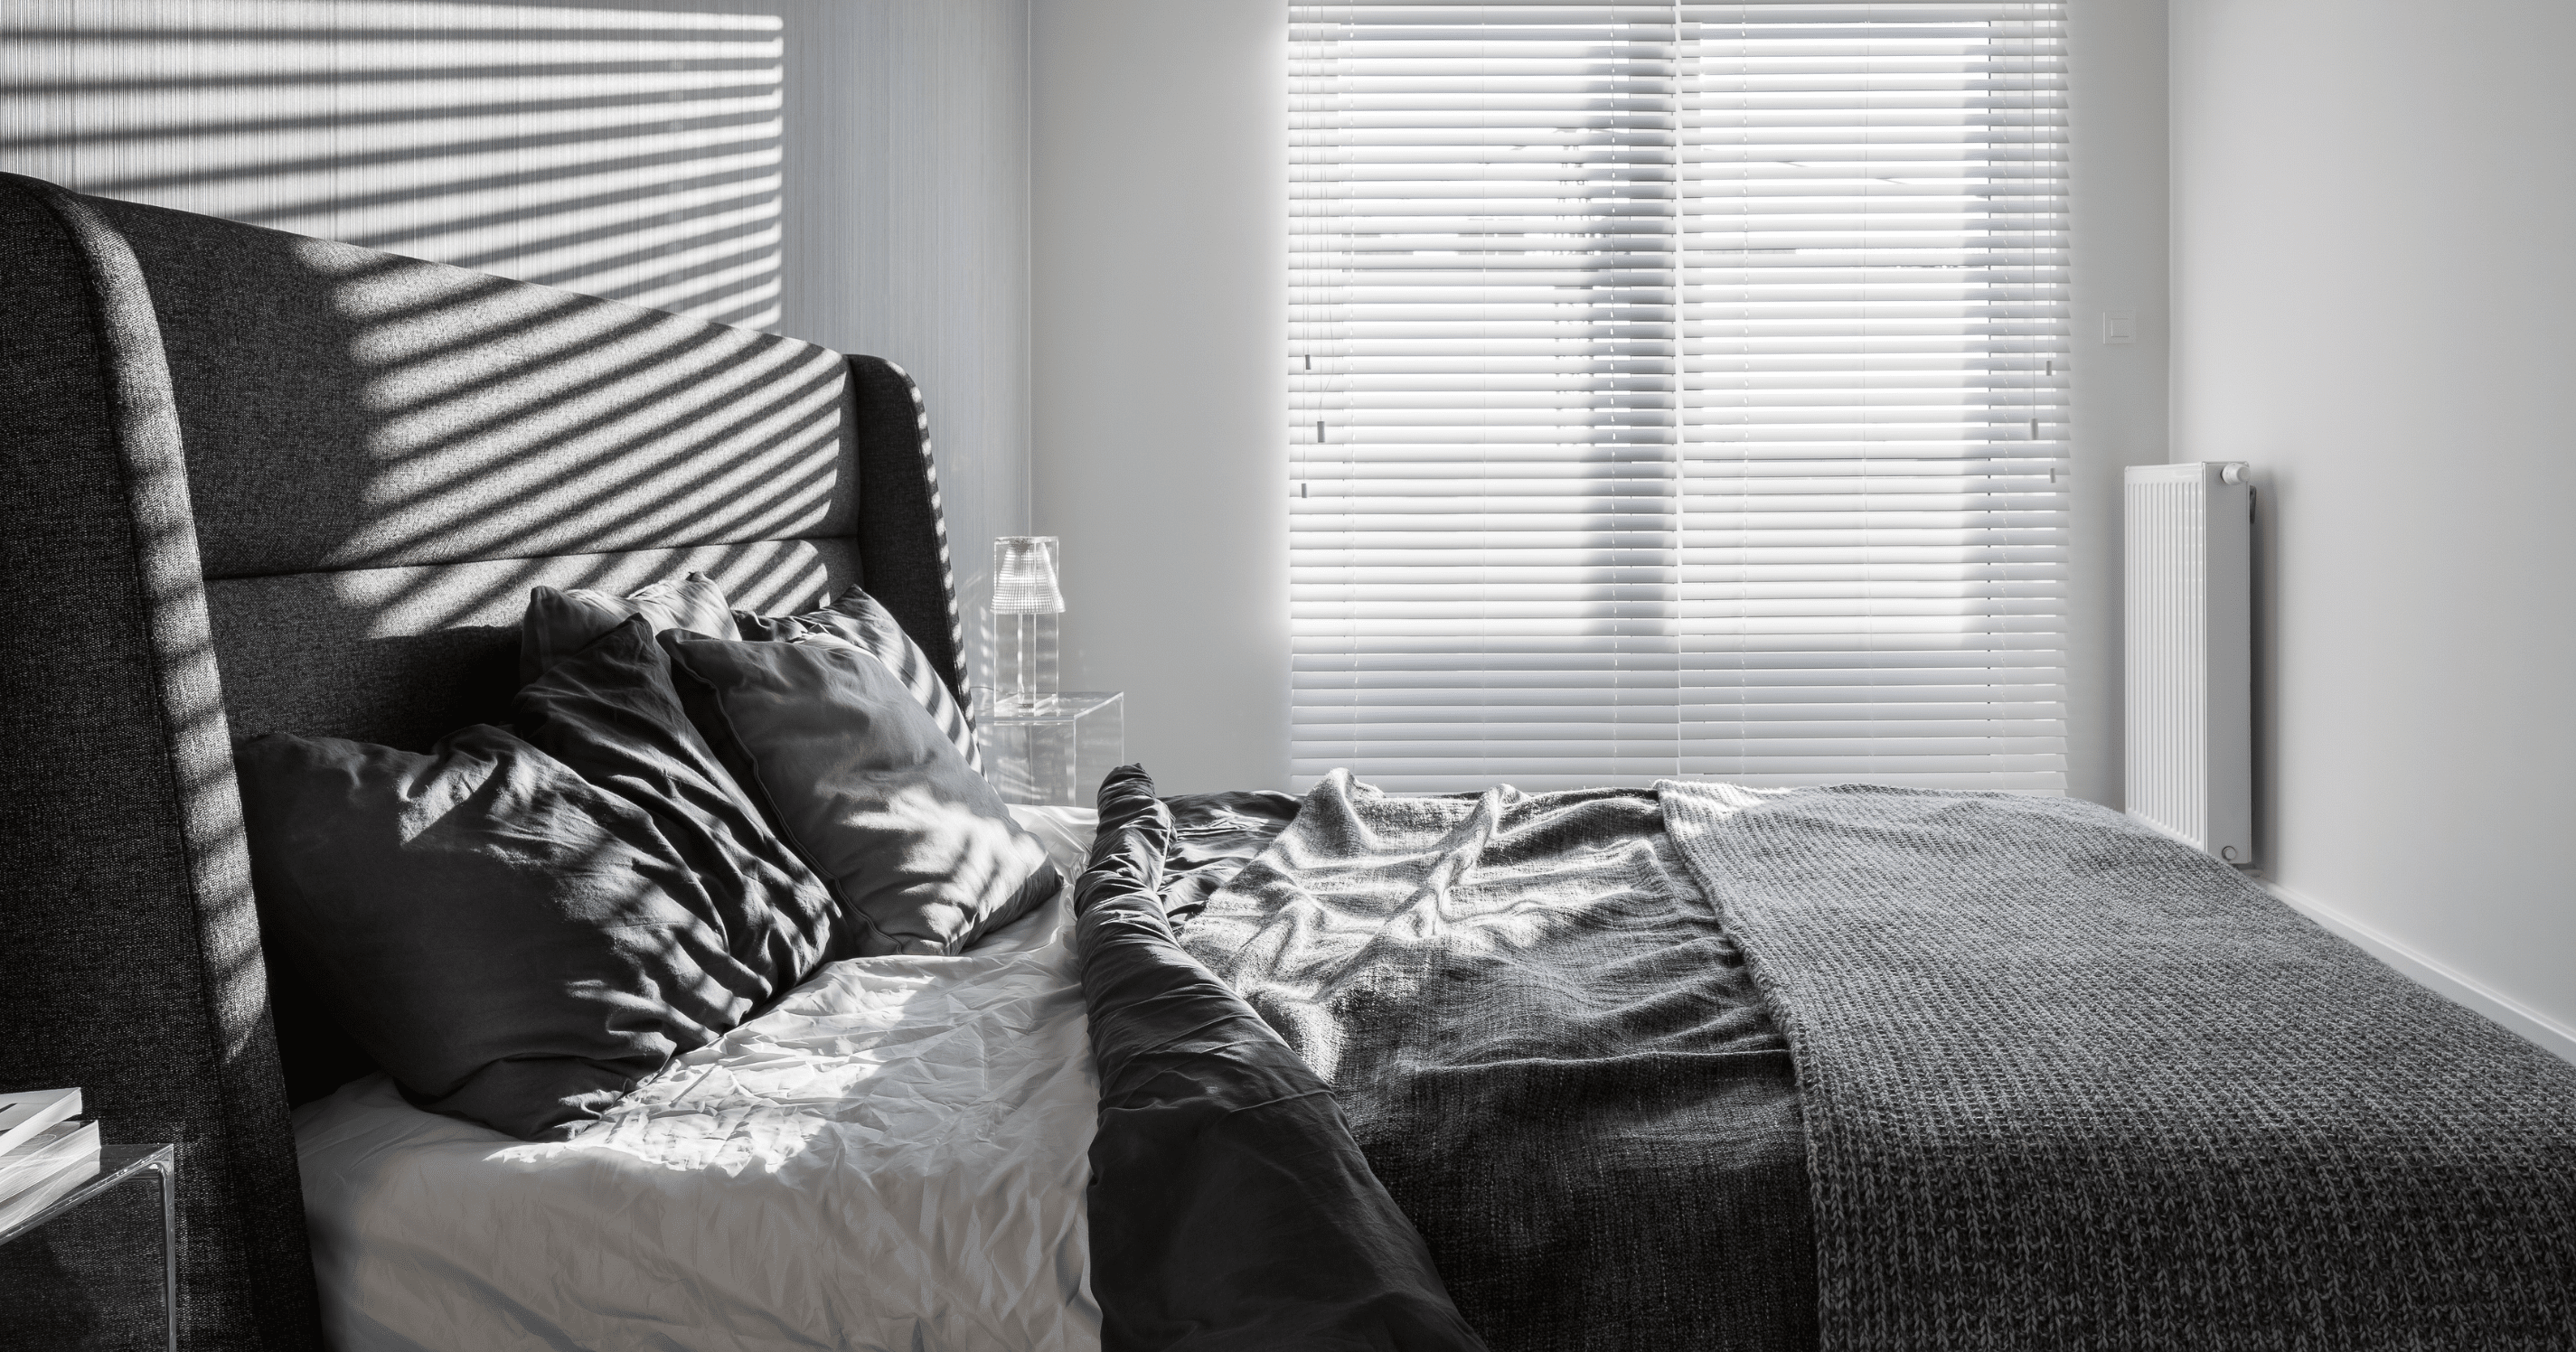 A stock image of a bedroom with window shutters - start your property search on Share to Buy!